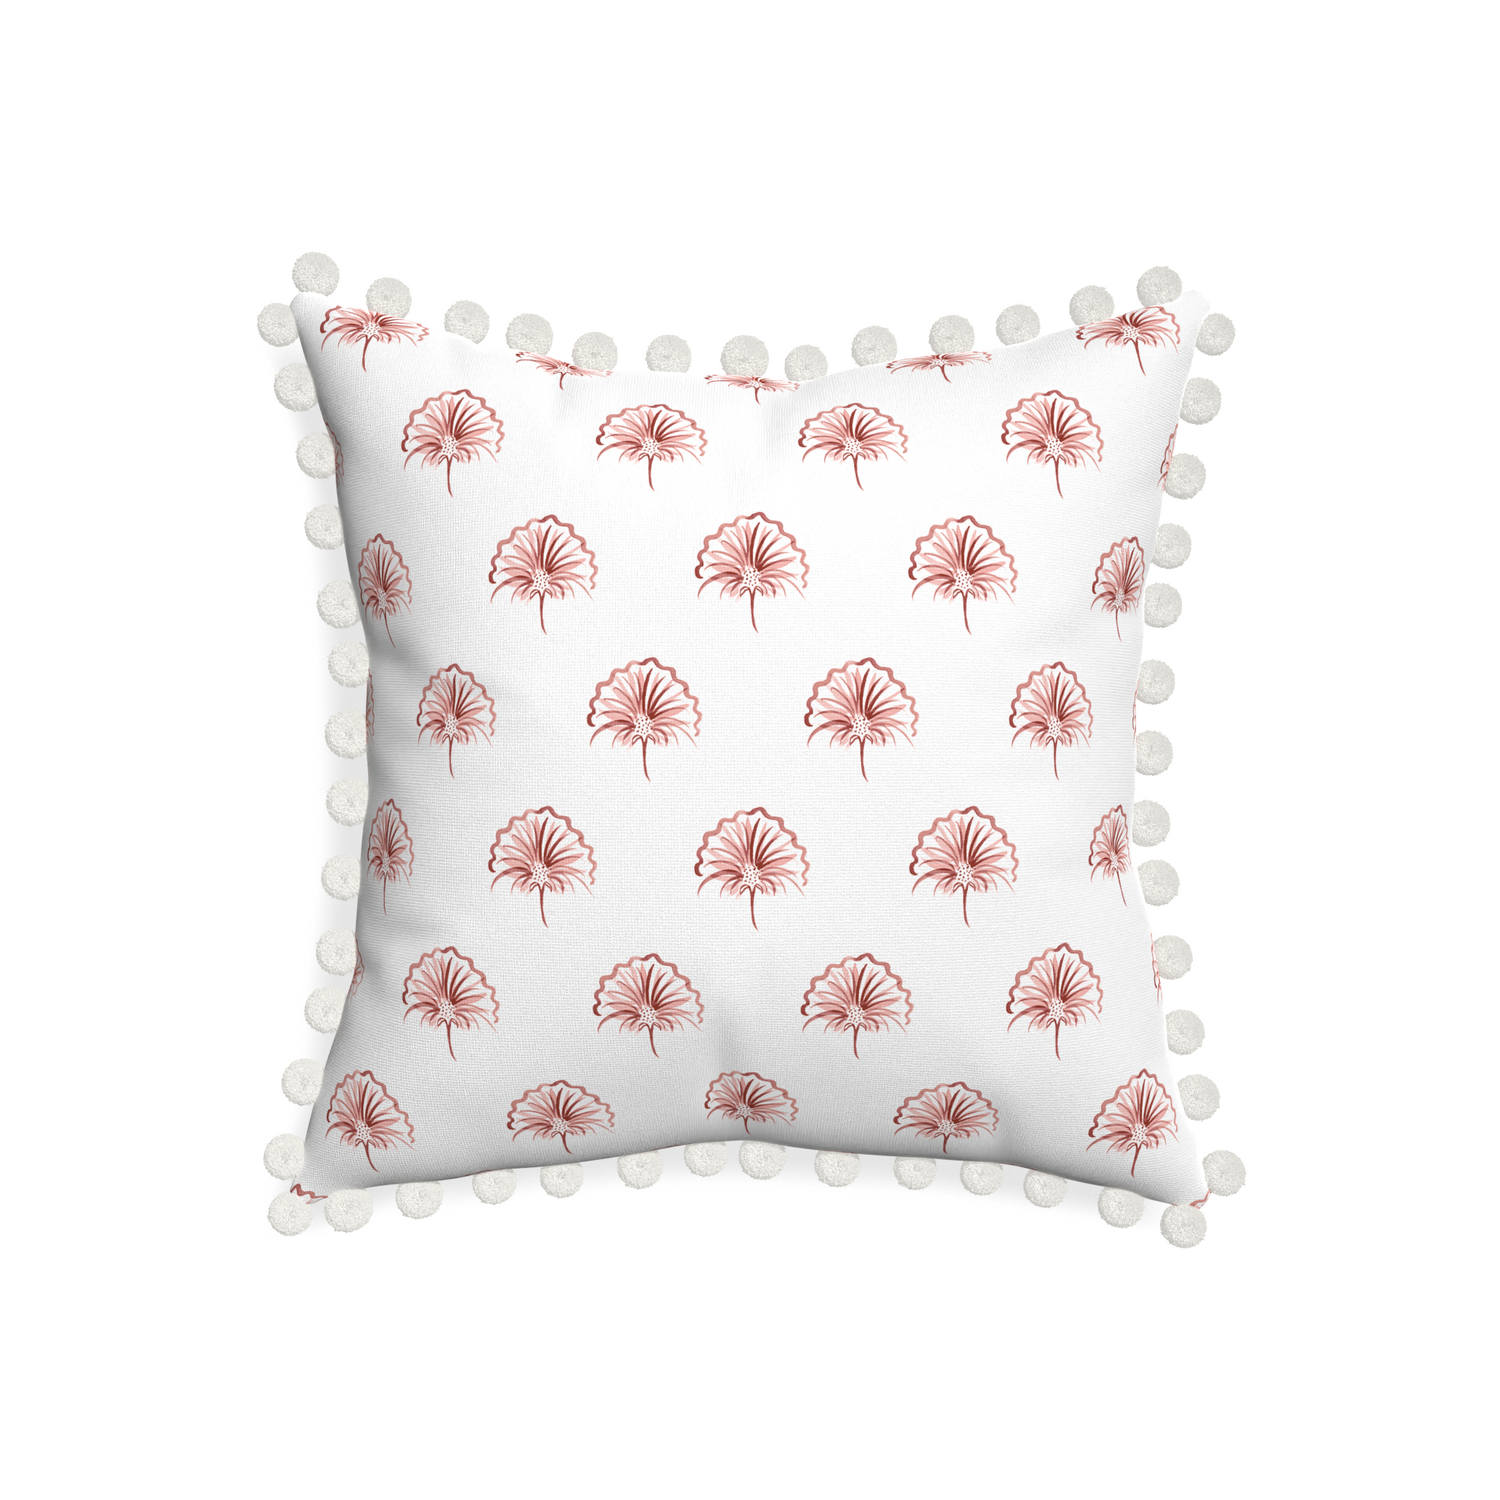 20-square penelope rose custom floral pinkpillow with snow pom pom on white background